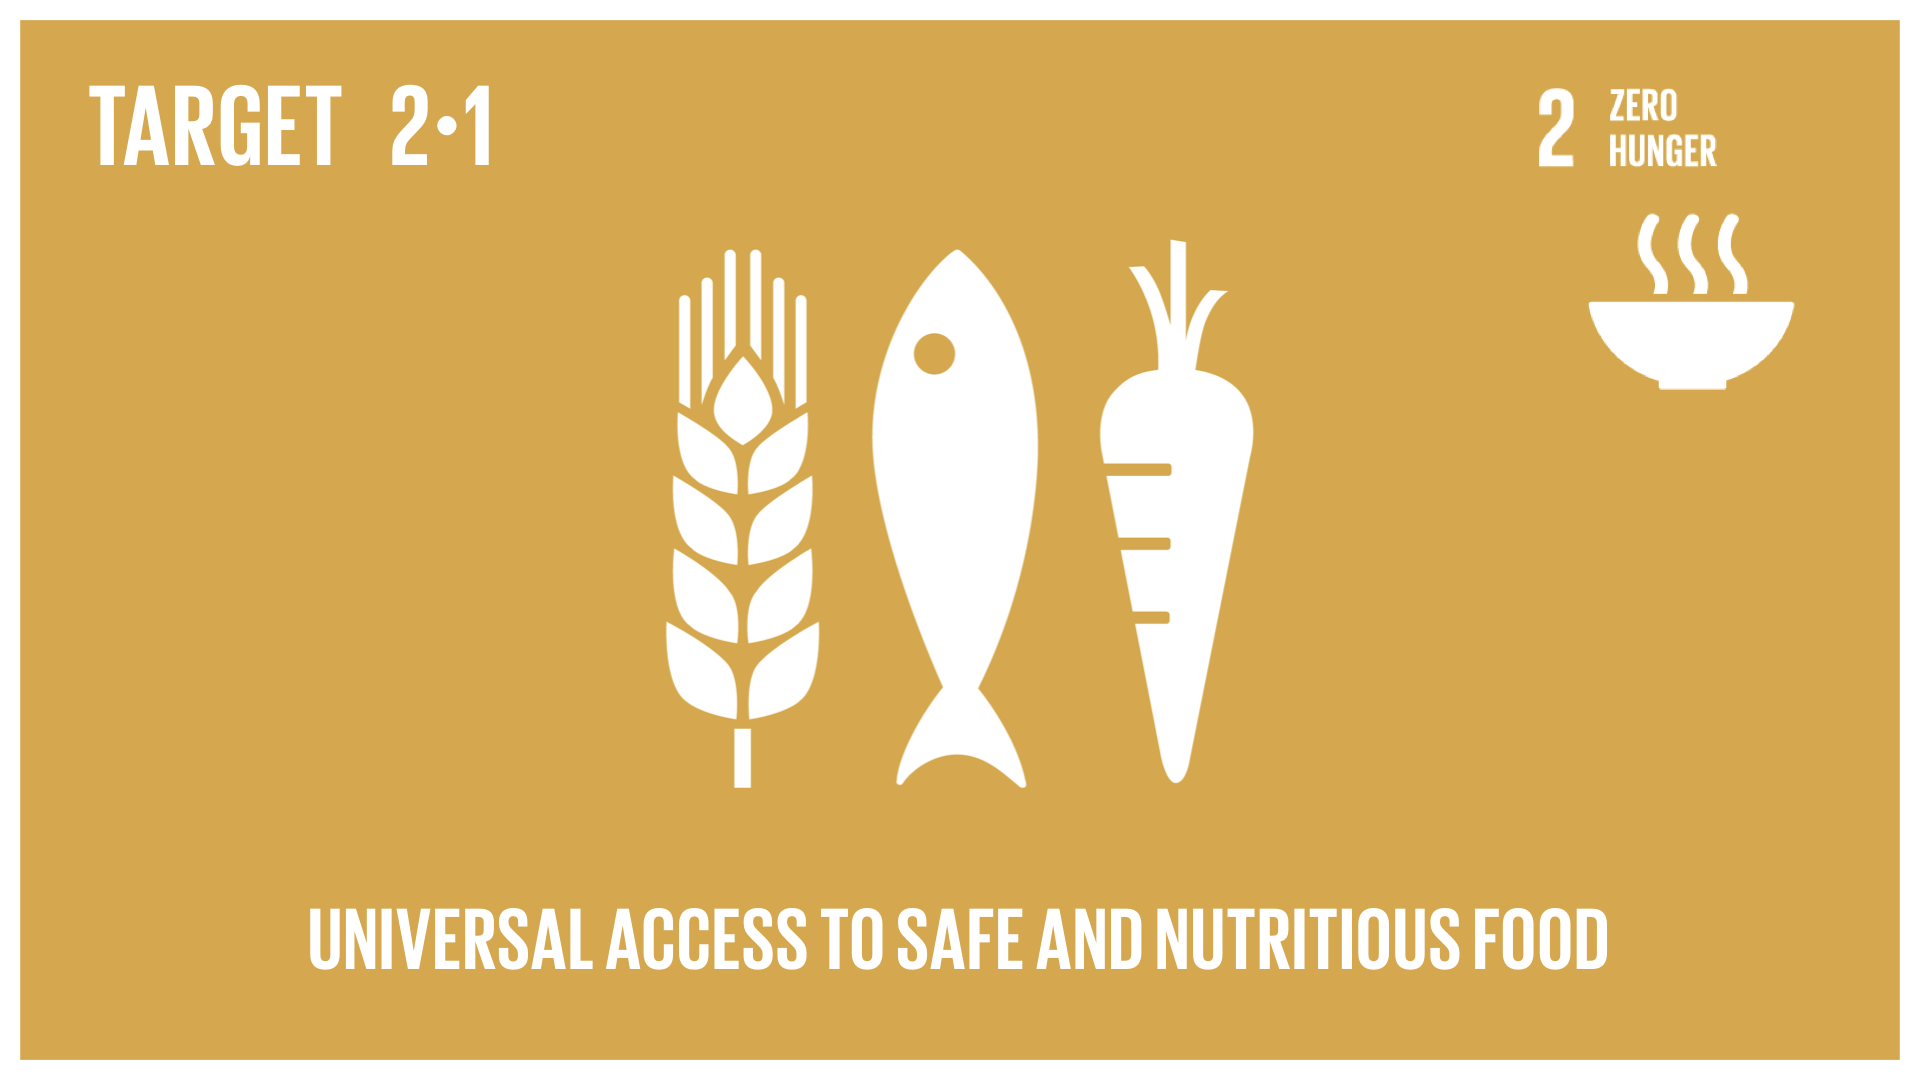 Graphic displaying the universal access to safe, nutritious and sufficient food all year round